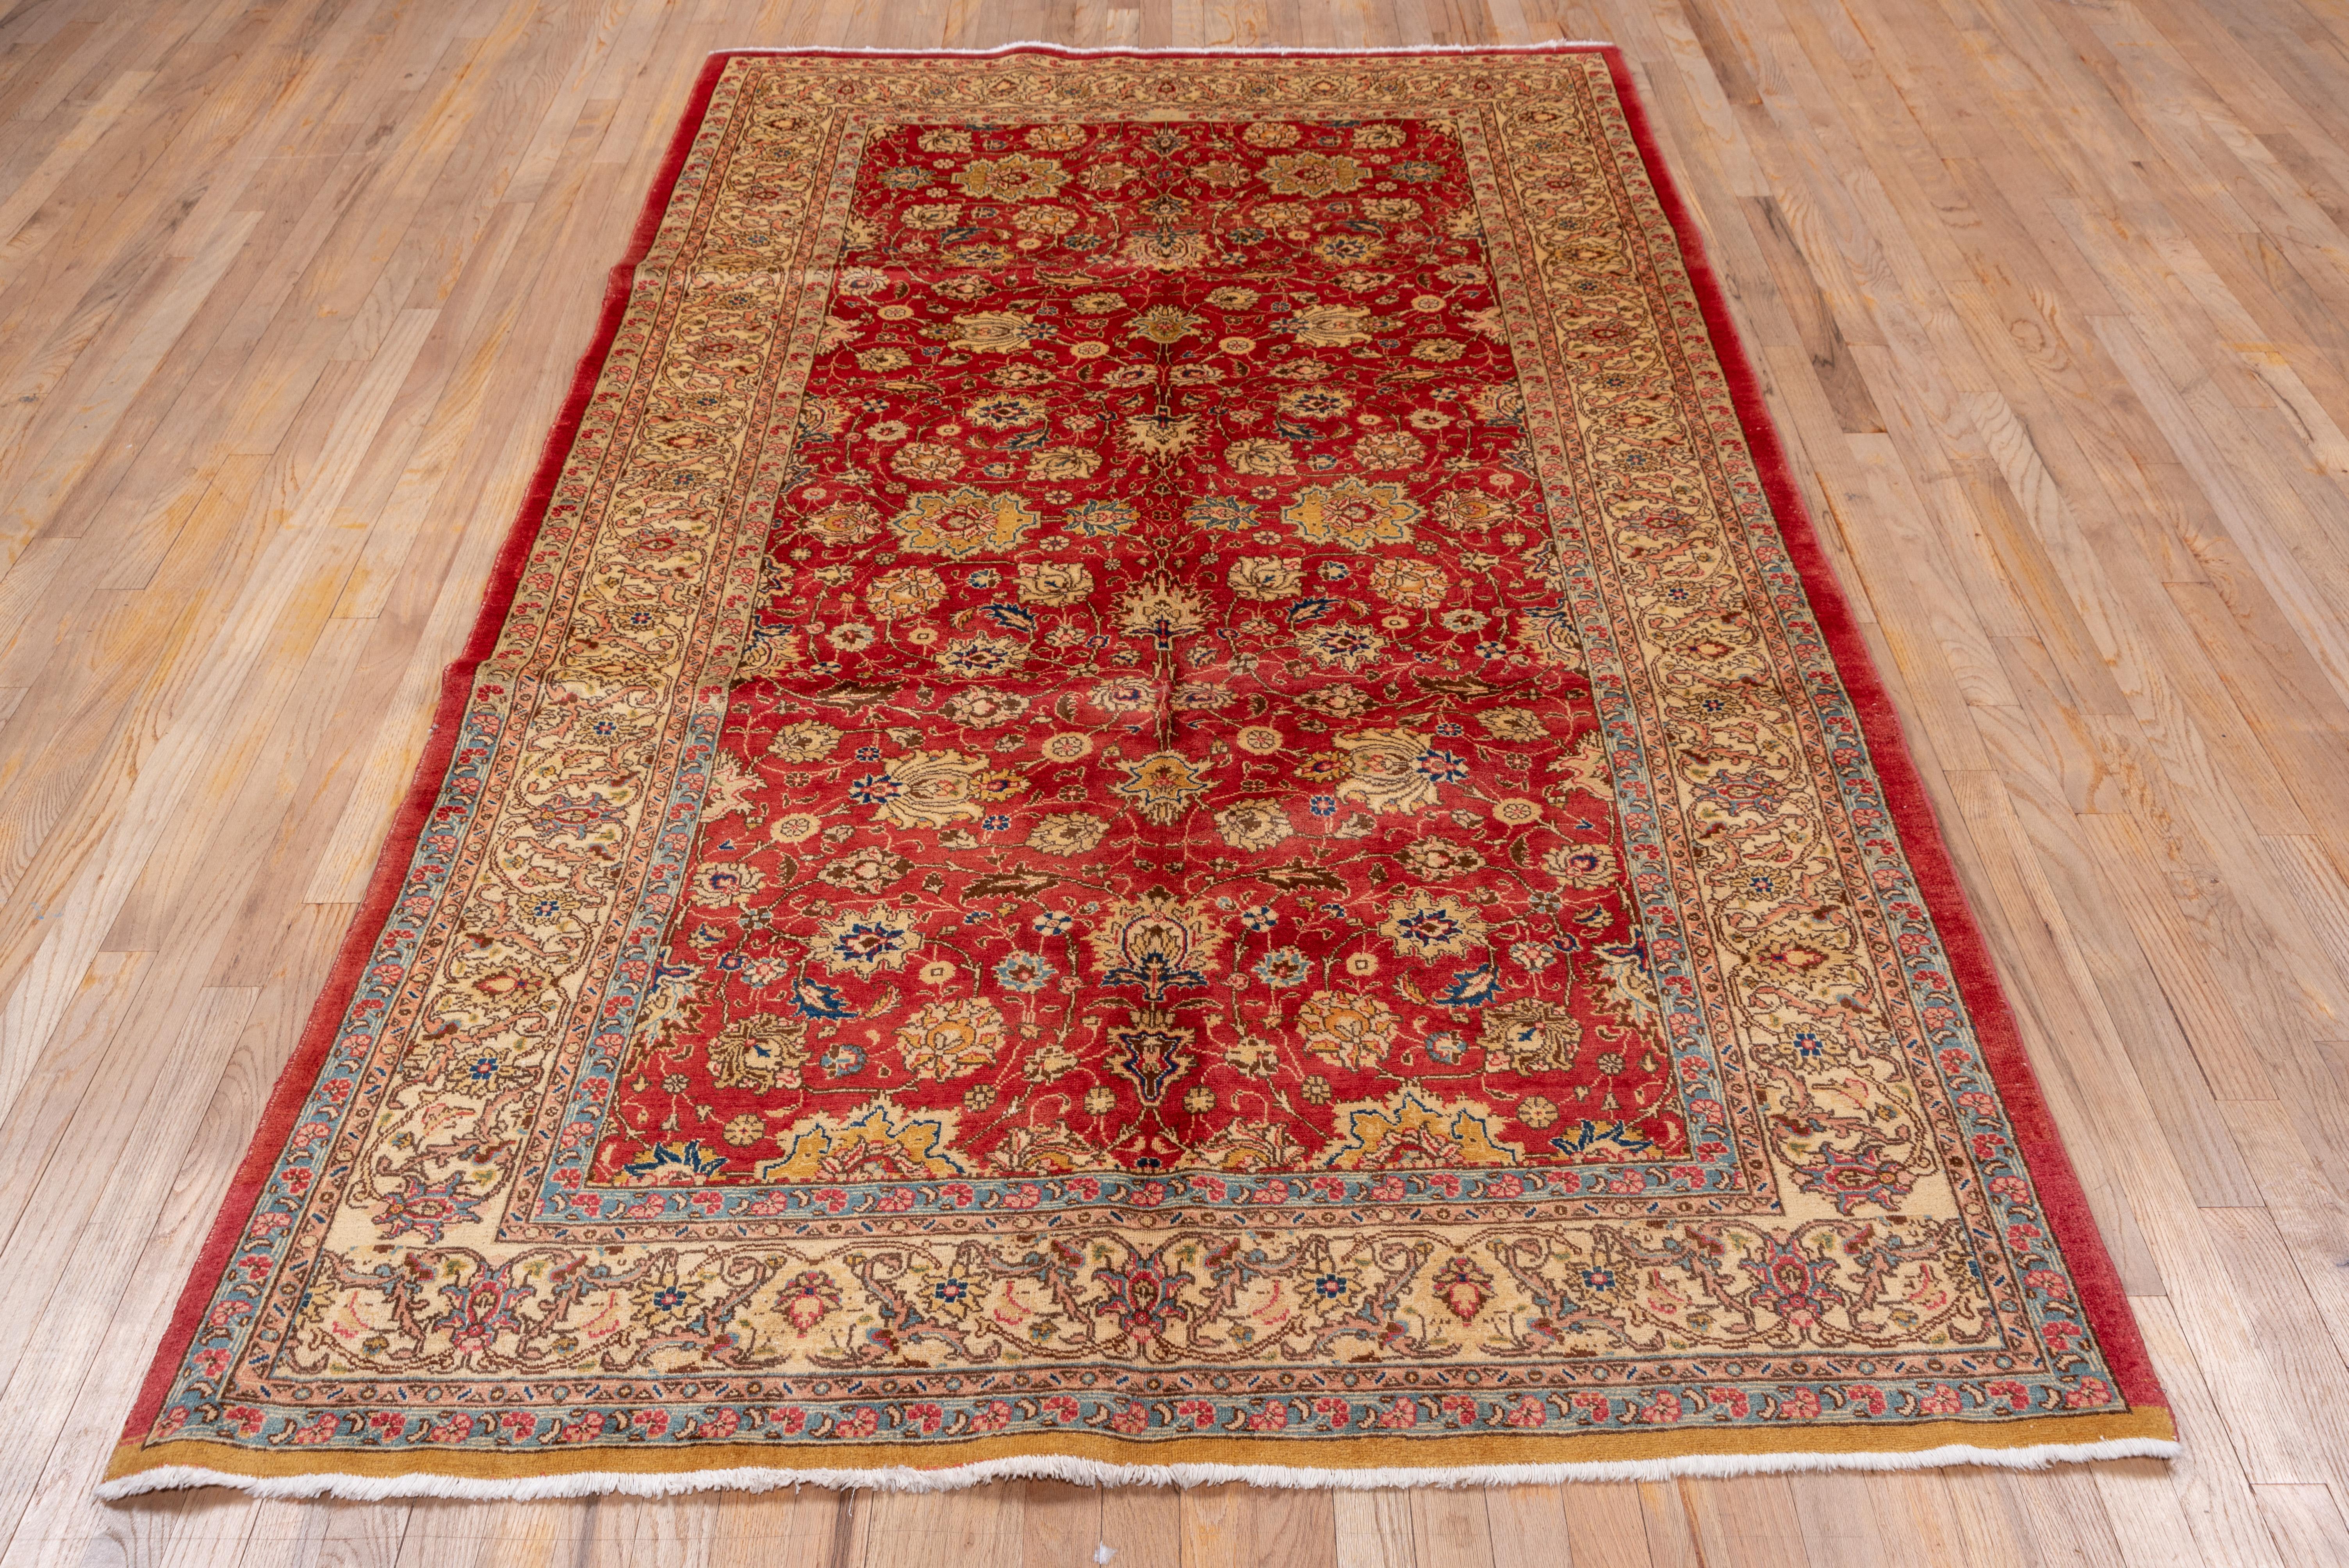 Mid-20th Century Antique Persian Tabriz Rug, Red Floral Field with Blue Accents, circa 1940s For Sale